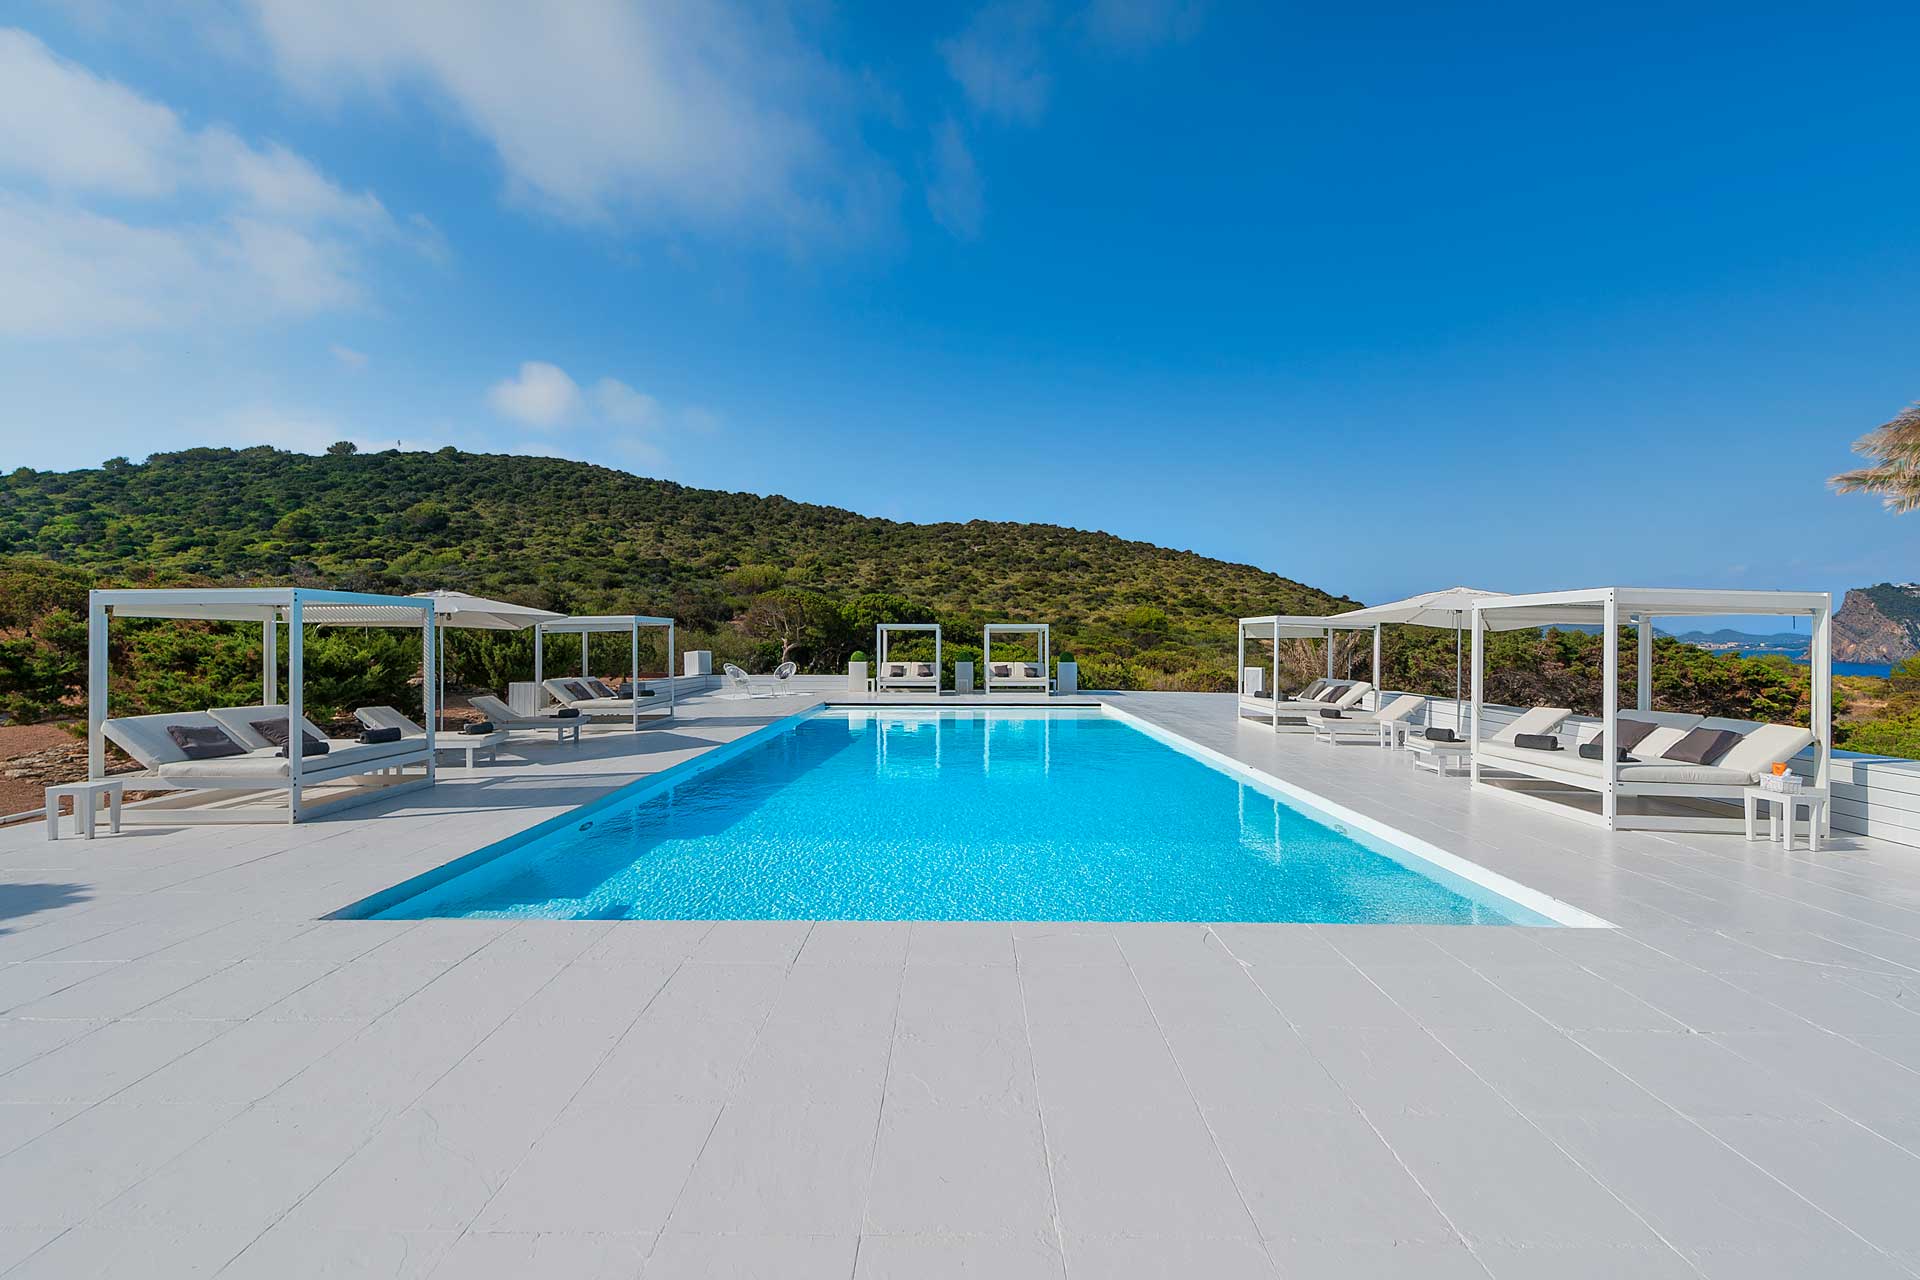 Residence TAGOMAGO - Pool area and terraces